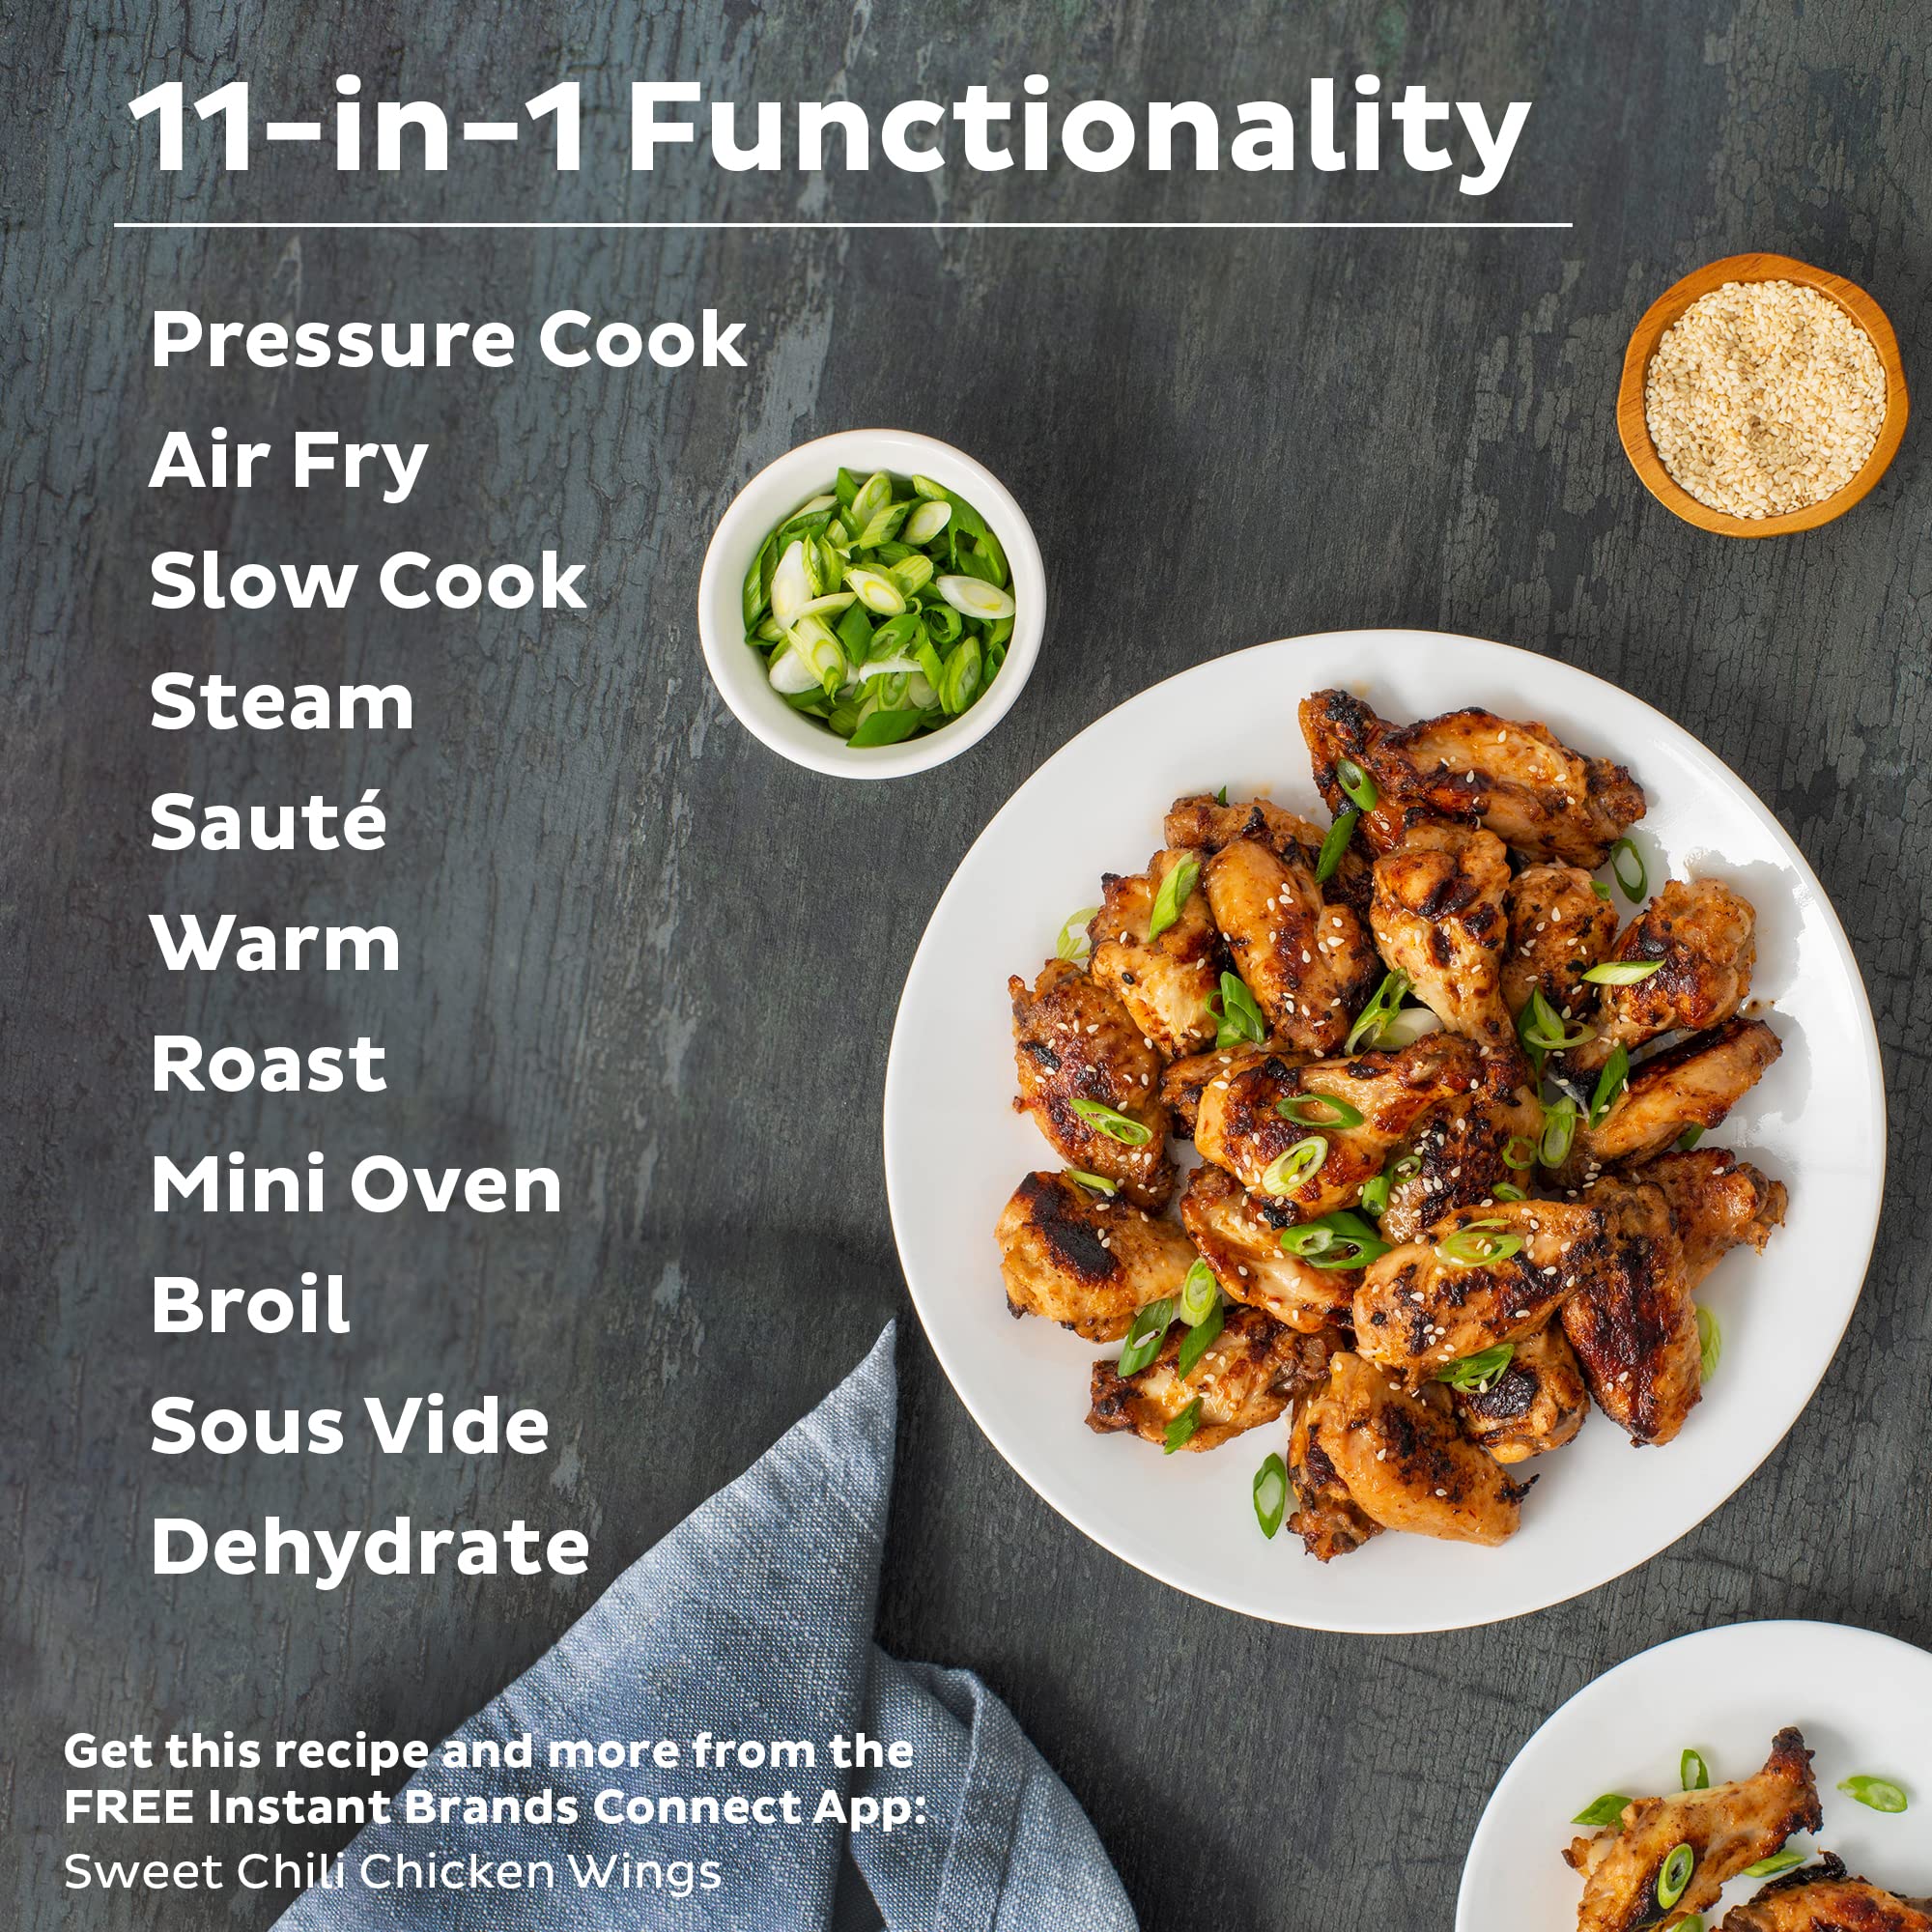 Instant Pot Duo Crisp 11-in-1 Air Fryer and Electric Pressure Cooker Combo with Multicooker Lids that Air Fries, Steams, Slow Cooks, Sautés, Dehydrates, & More, Free App With Over 800 Recipes, 8 Quart